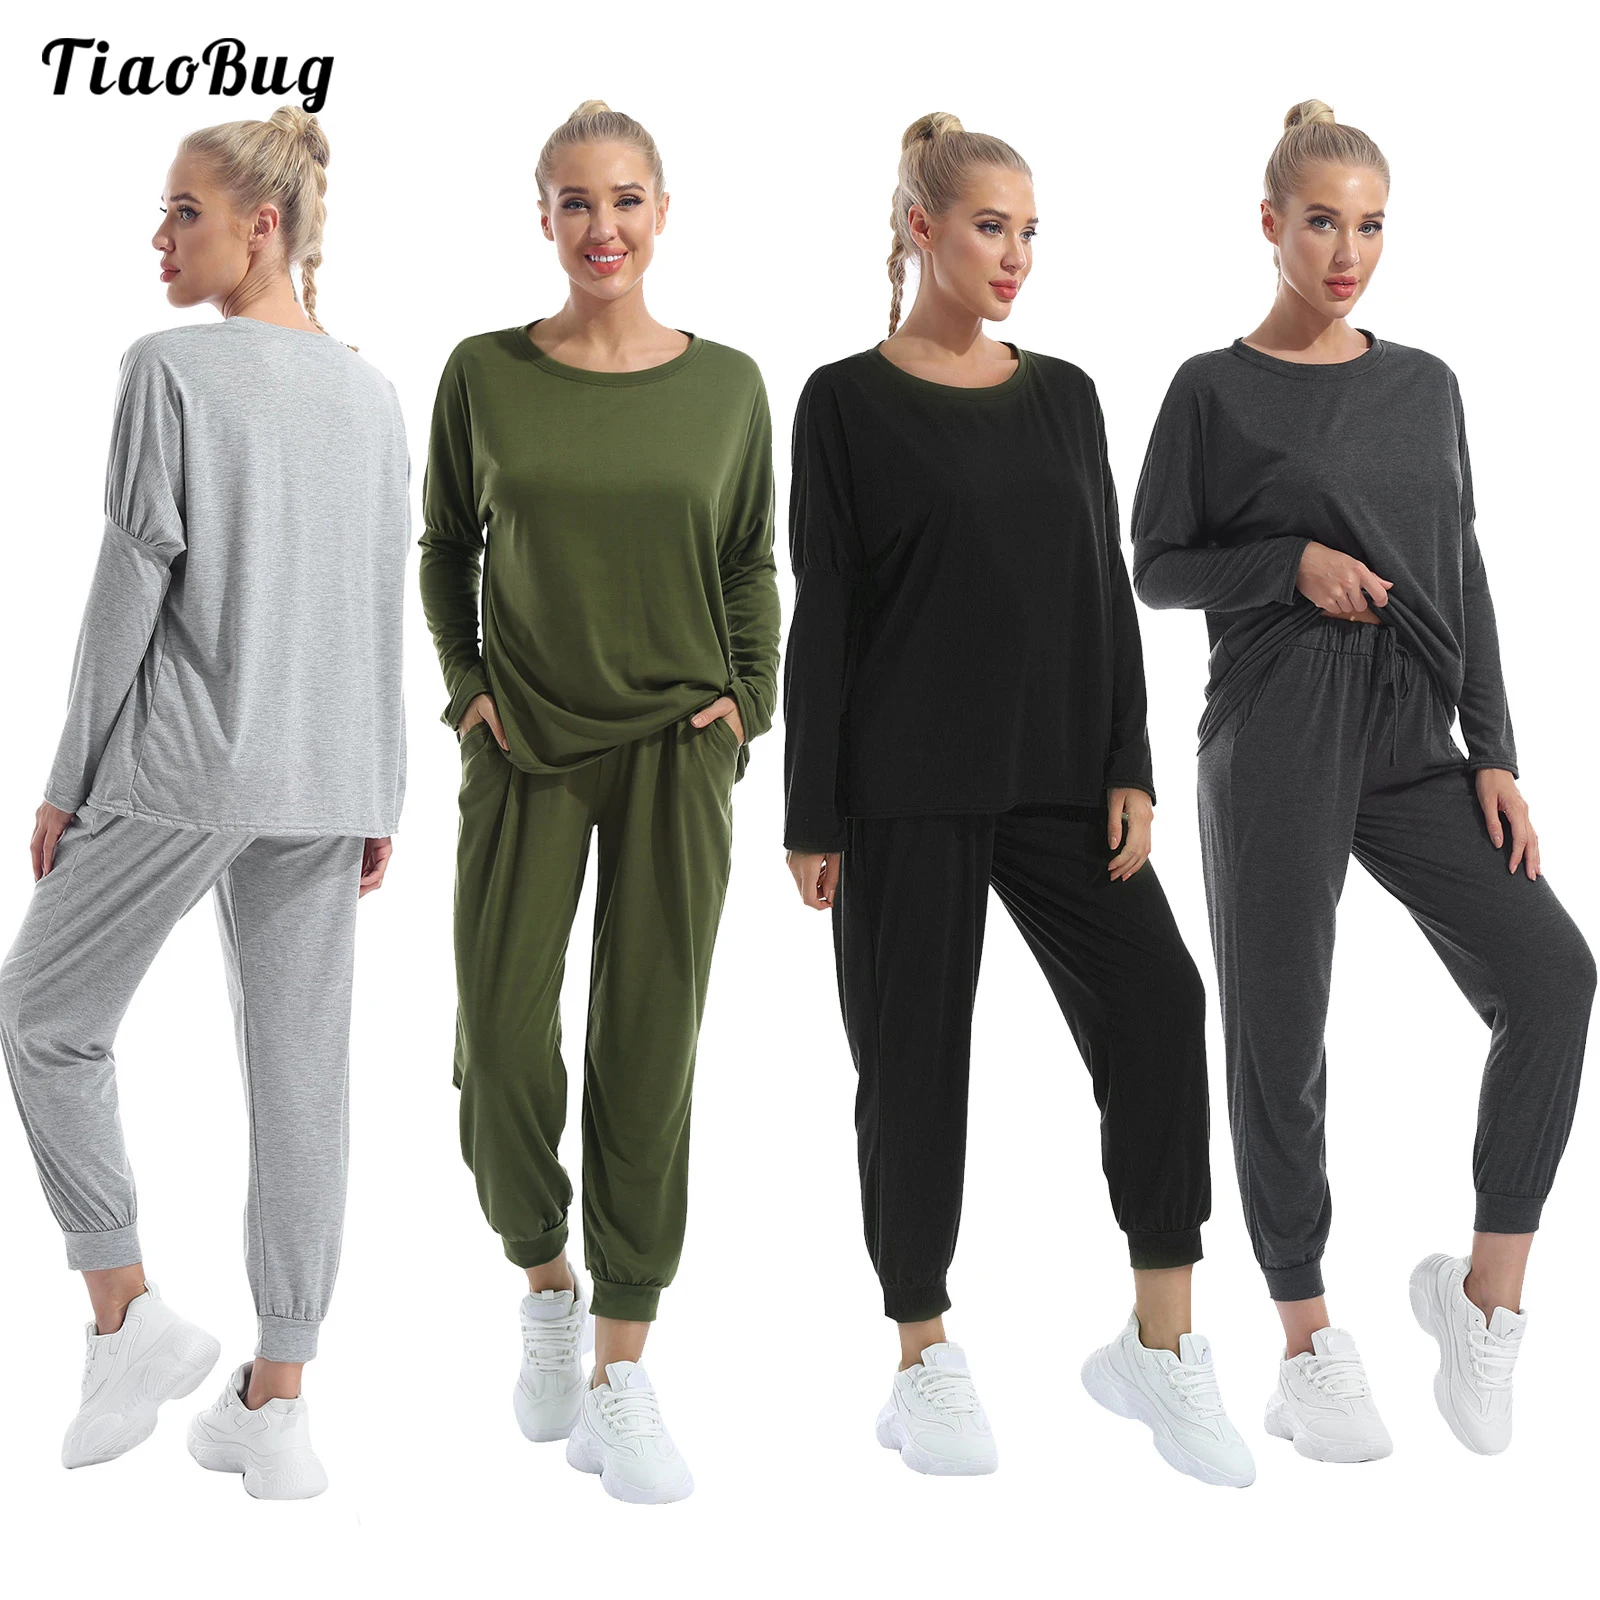 

Spring Autumn 2Pcs Women Pure Color Casual Sport Suit Round Neck Long Sleeves T-Shirt Pants Leisure Outfit For Running Fitness